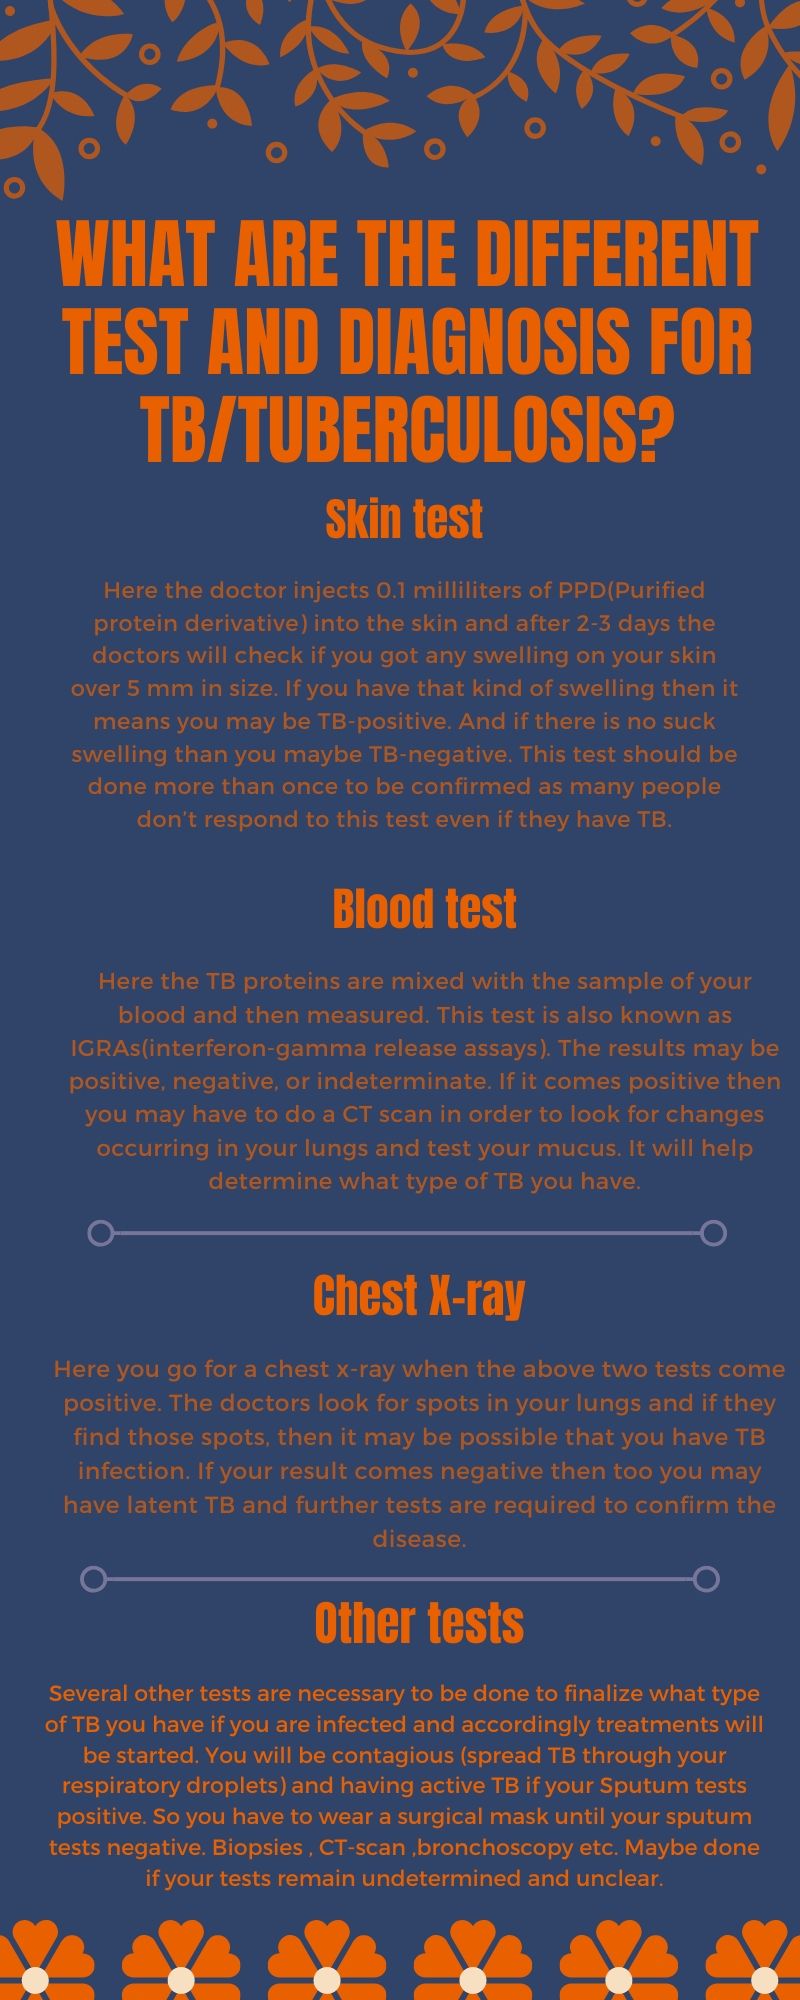 test and diagnosis for tuberculosis info-graphics